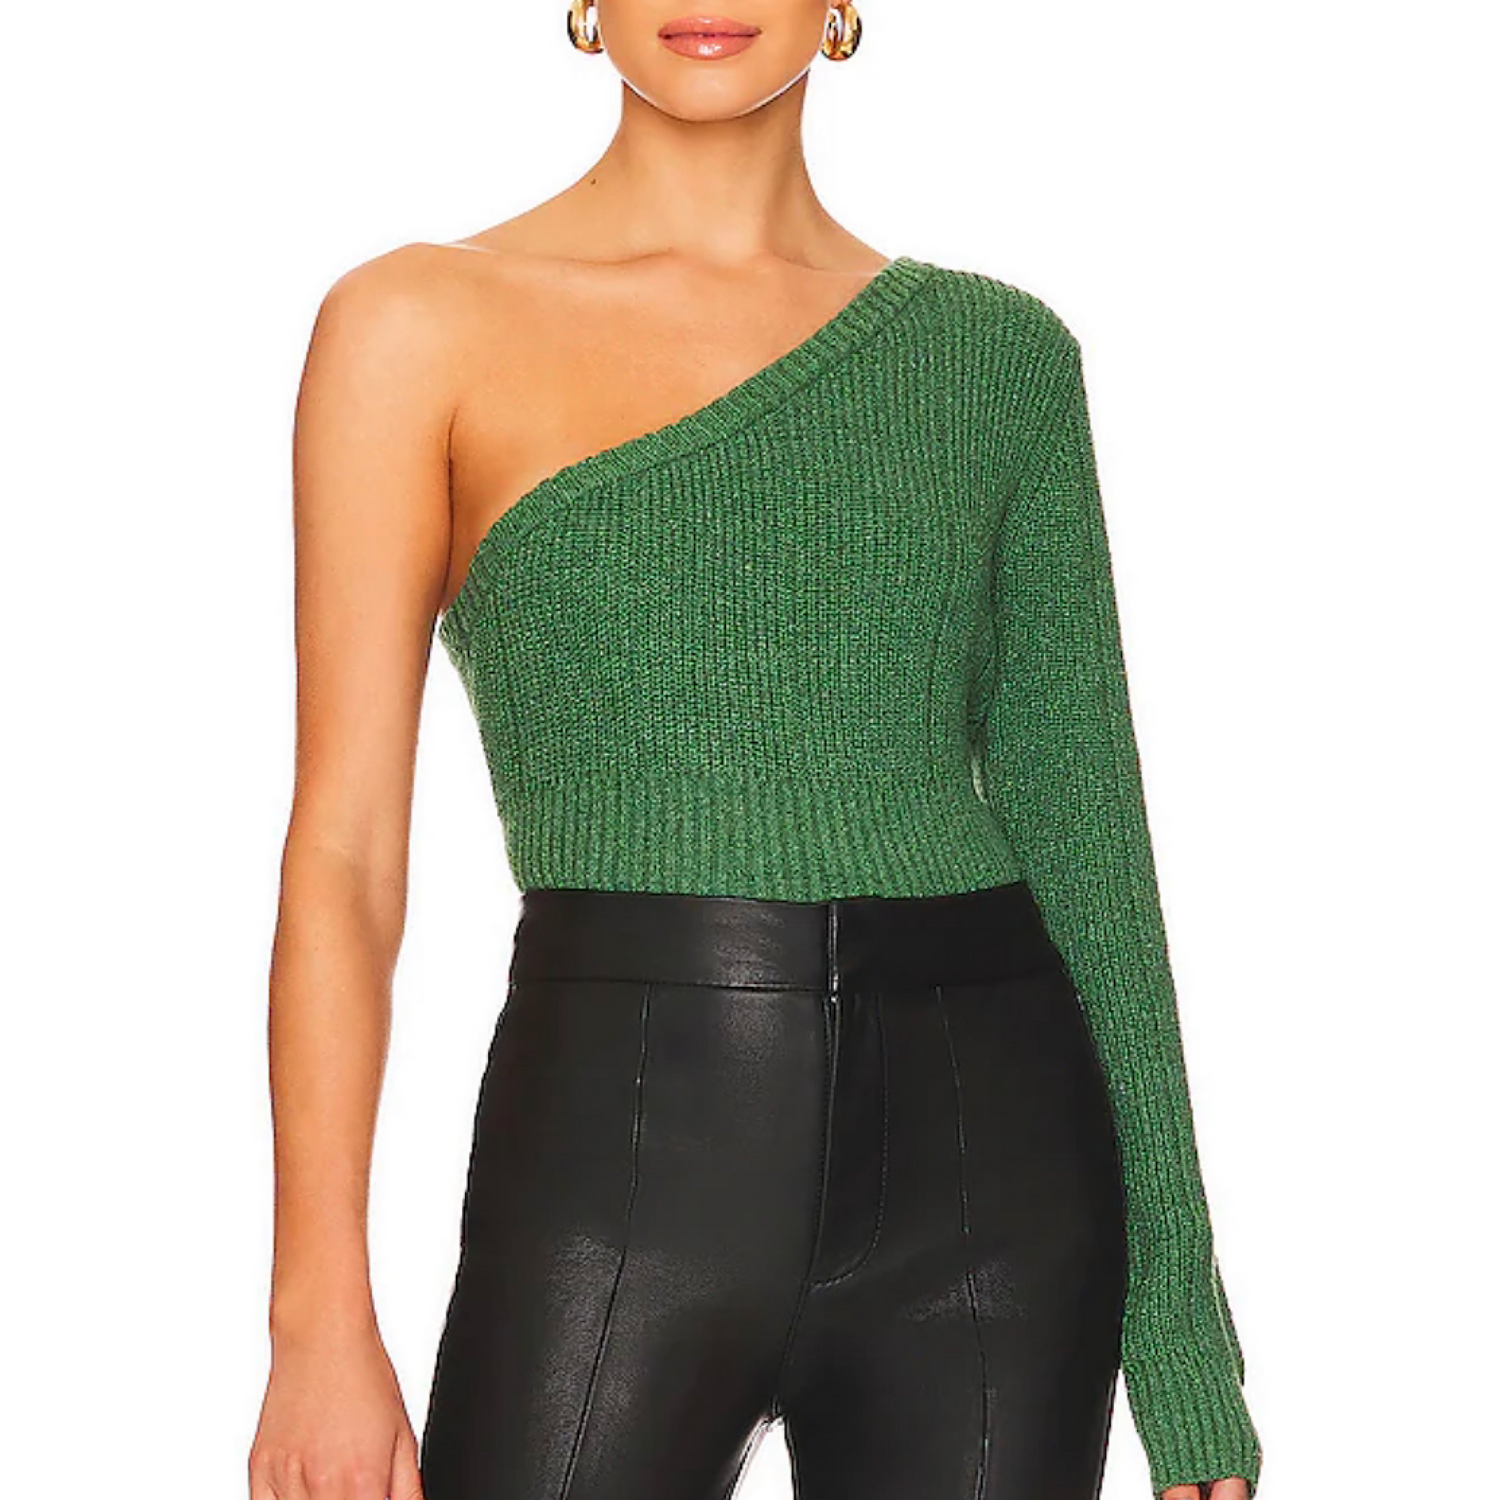 Asymmetrical neck, one-shoulder top. A little twist on a classic top!